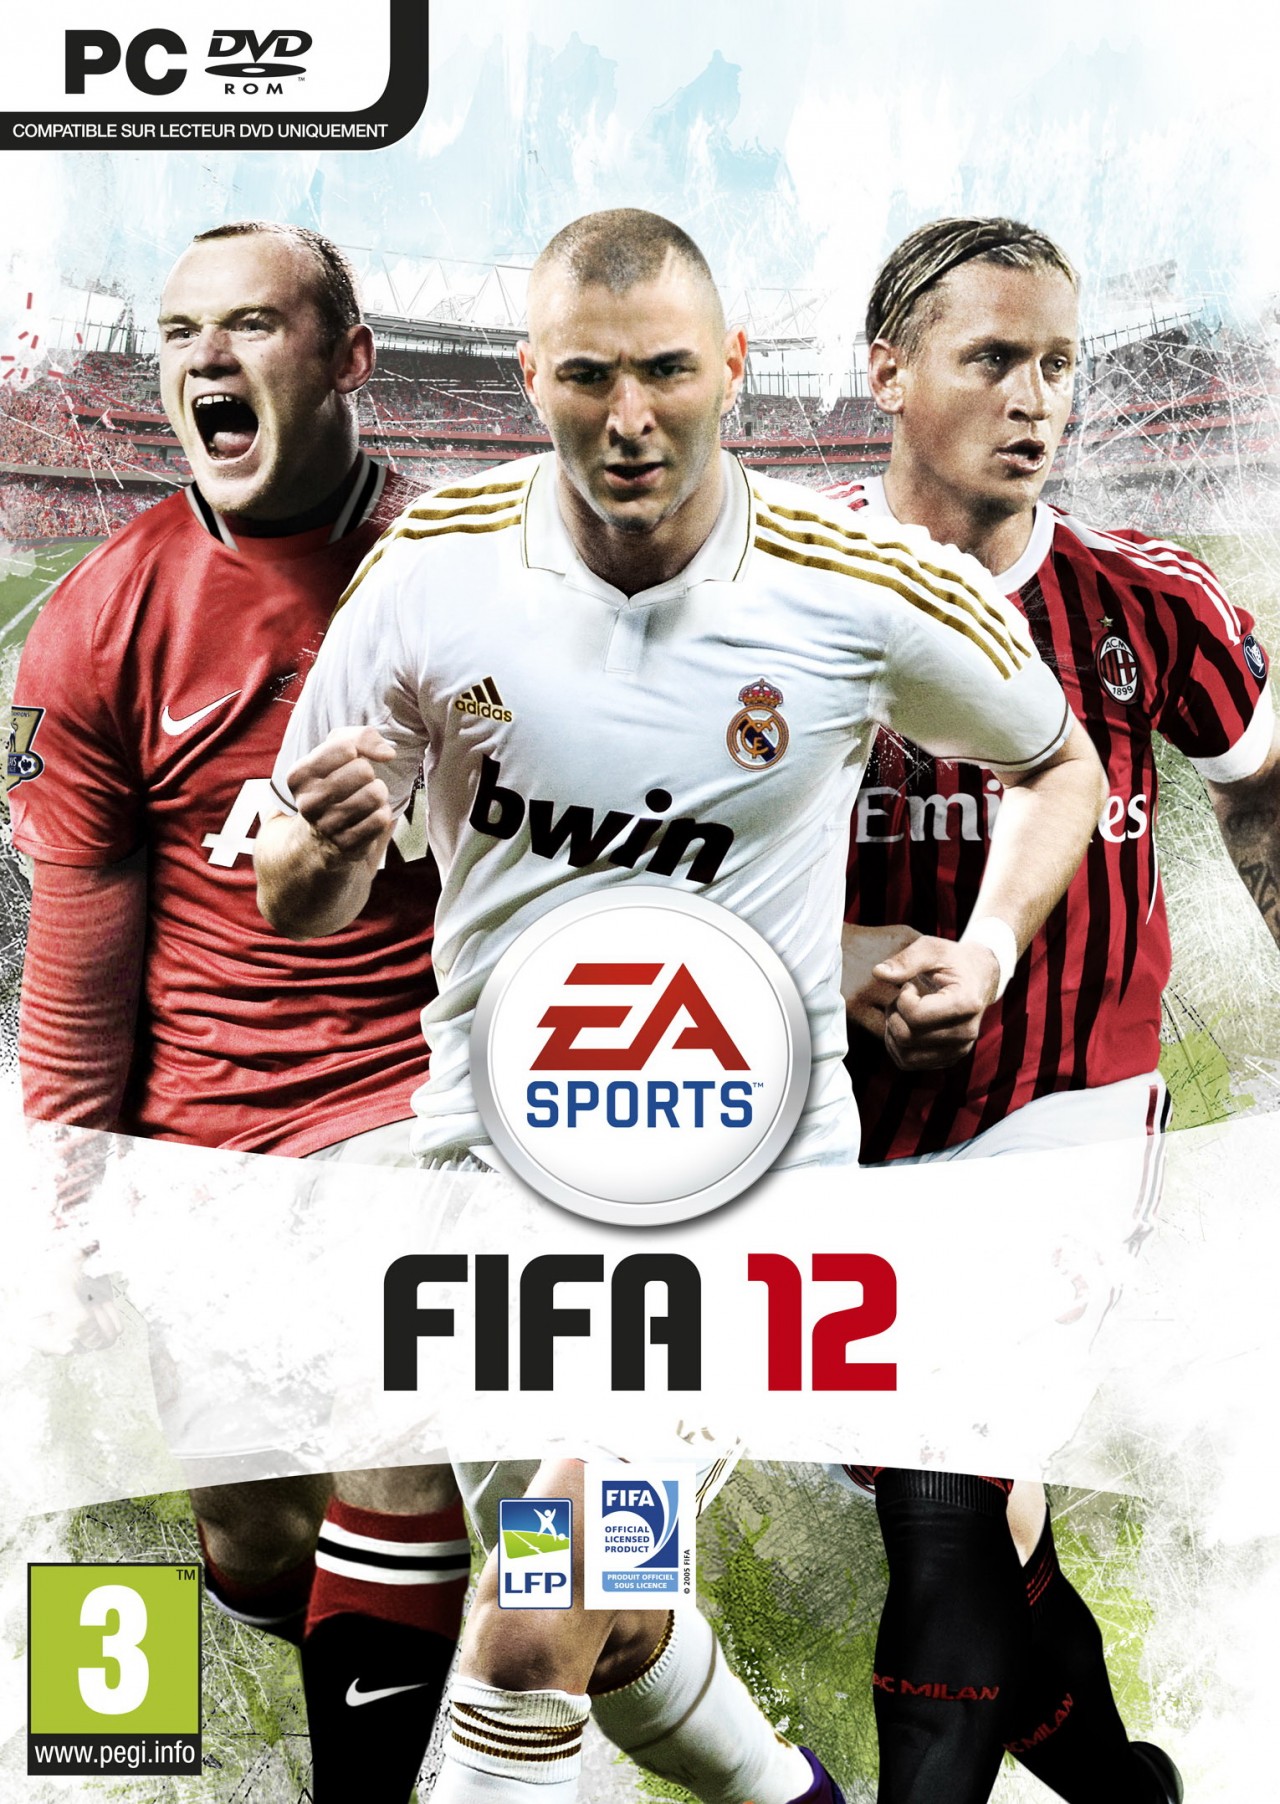 comment arreter penalty fifa 12